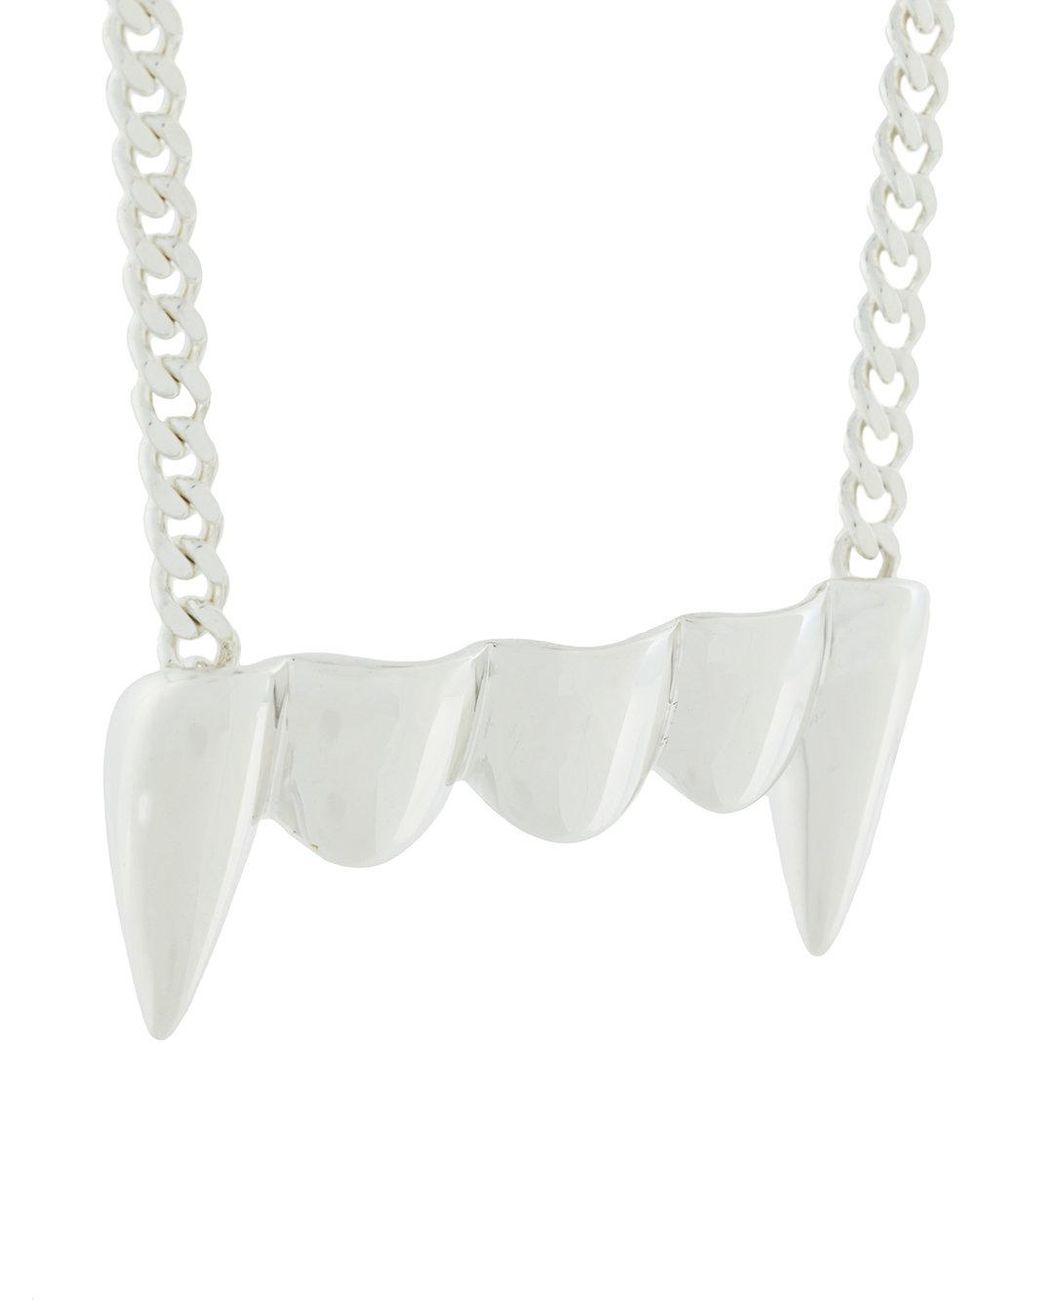 PAM FANG NECKLACE 新品未使用 | www.myglobaltax.com